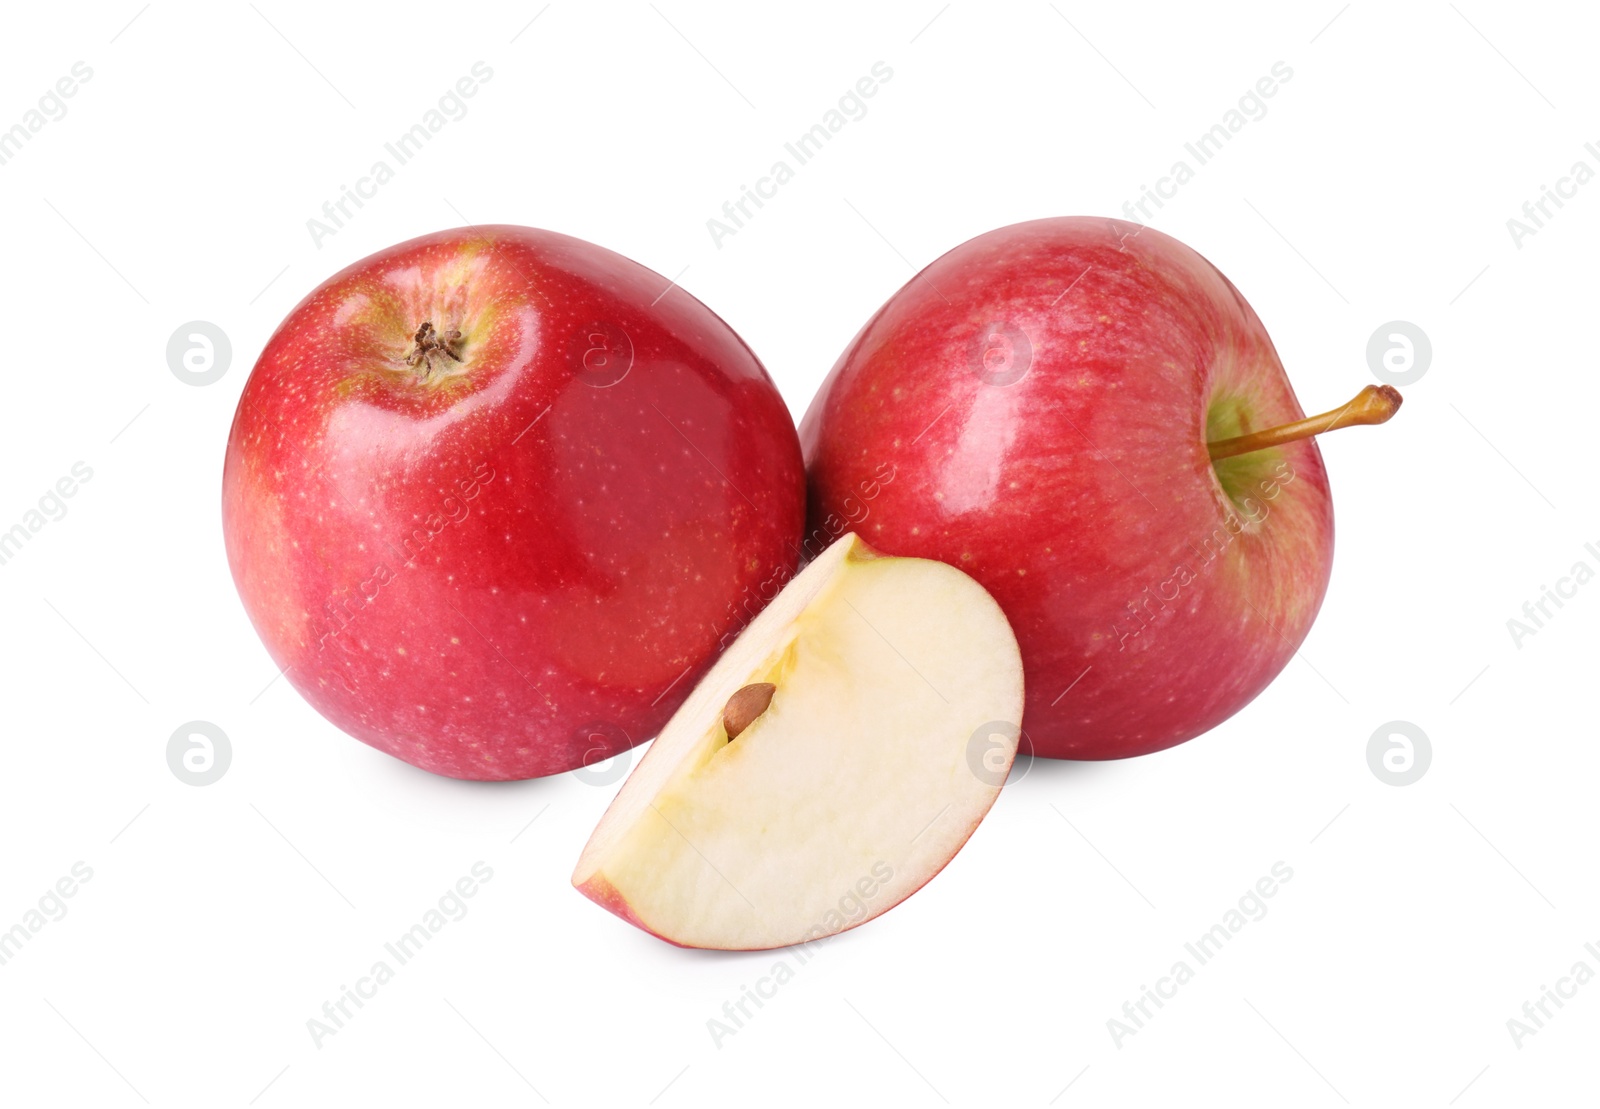 Photo of Whole and cut red apples isolated on white